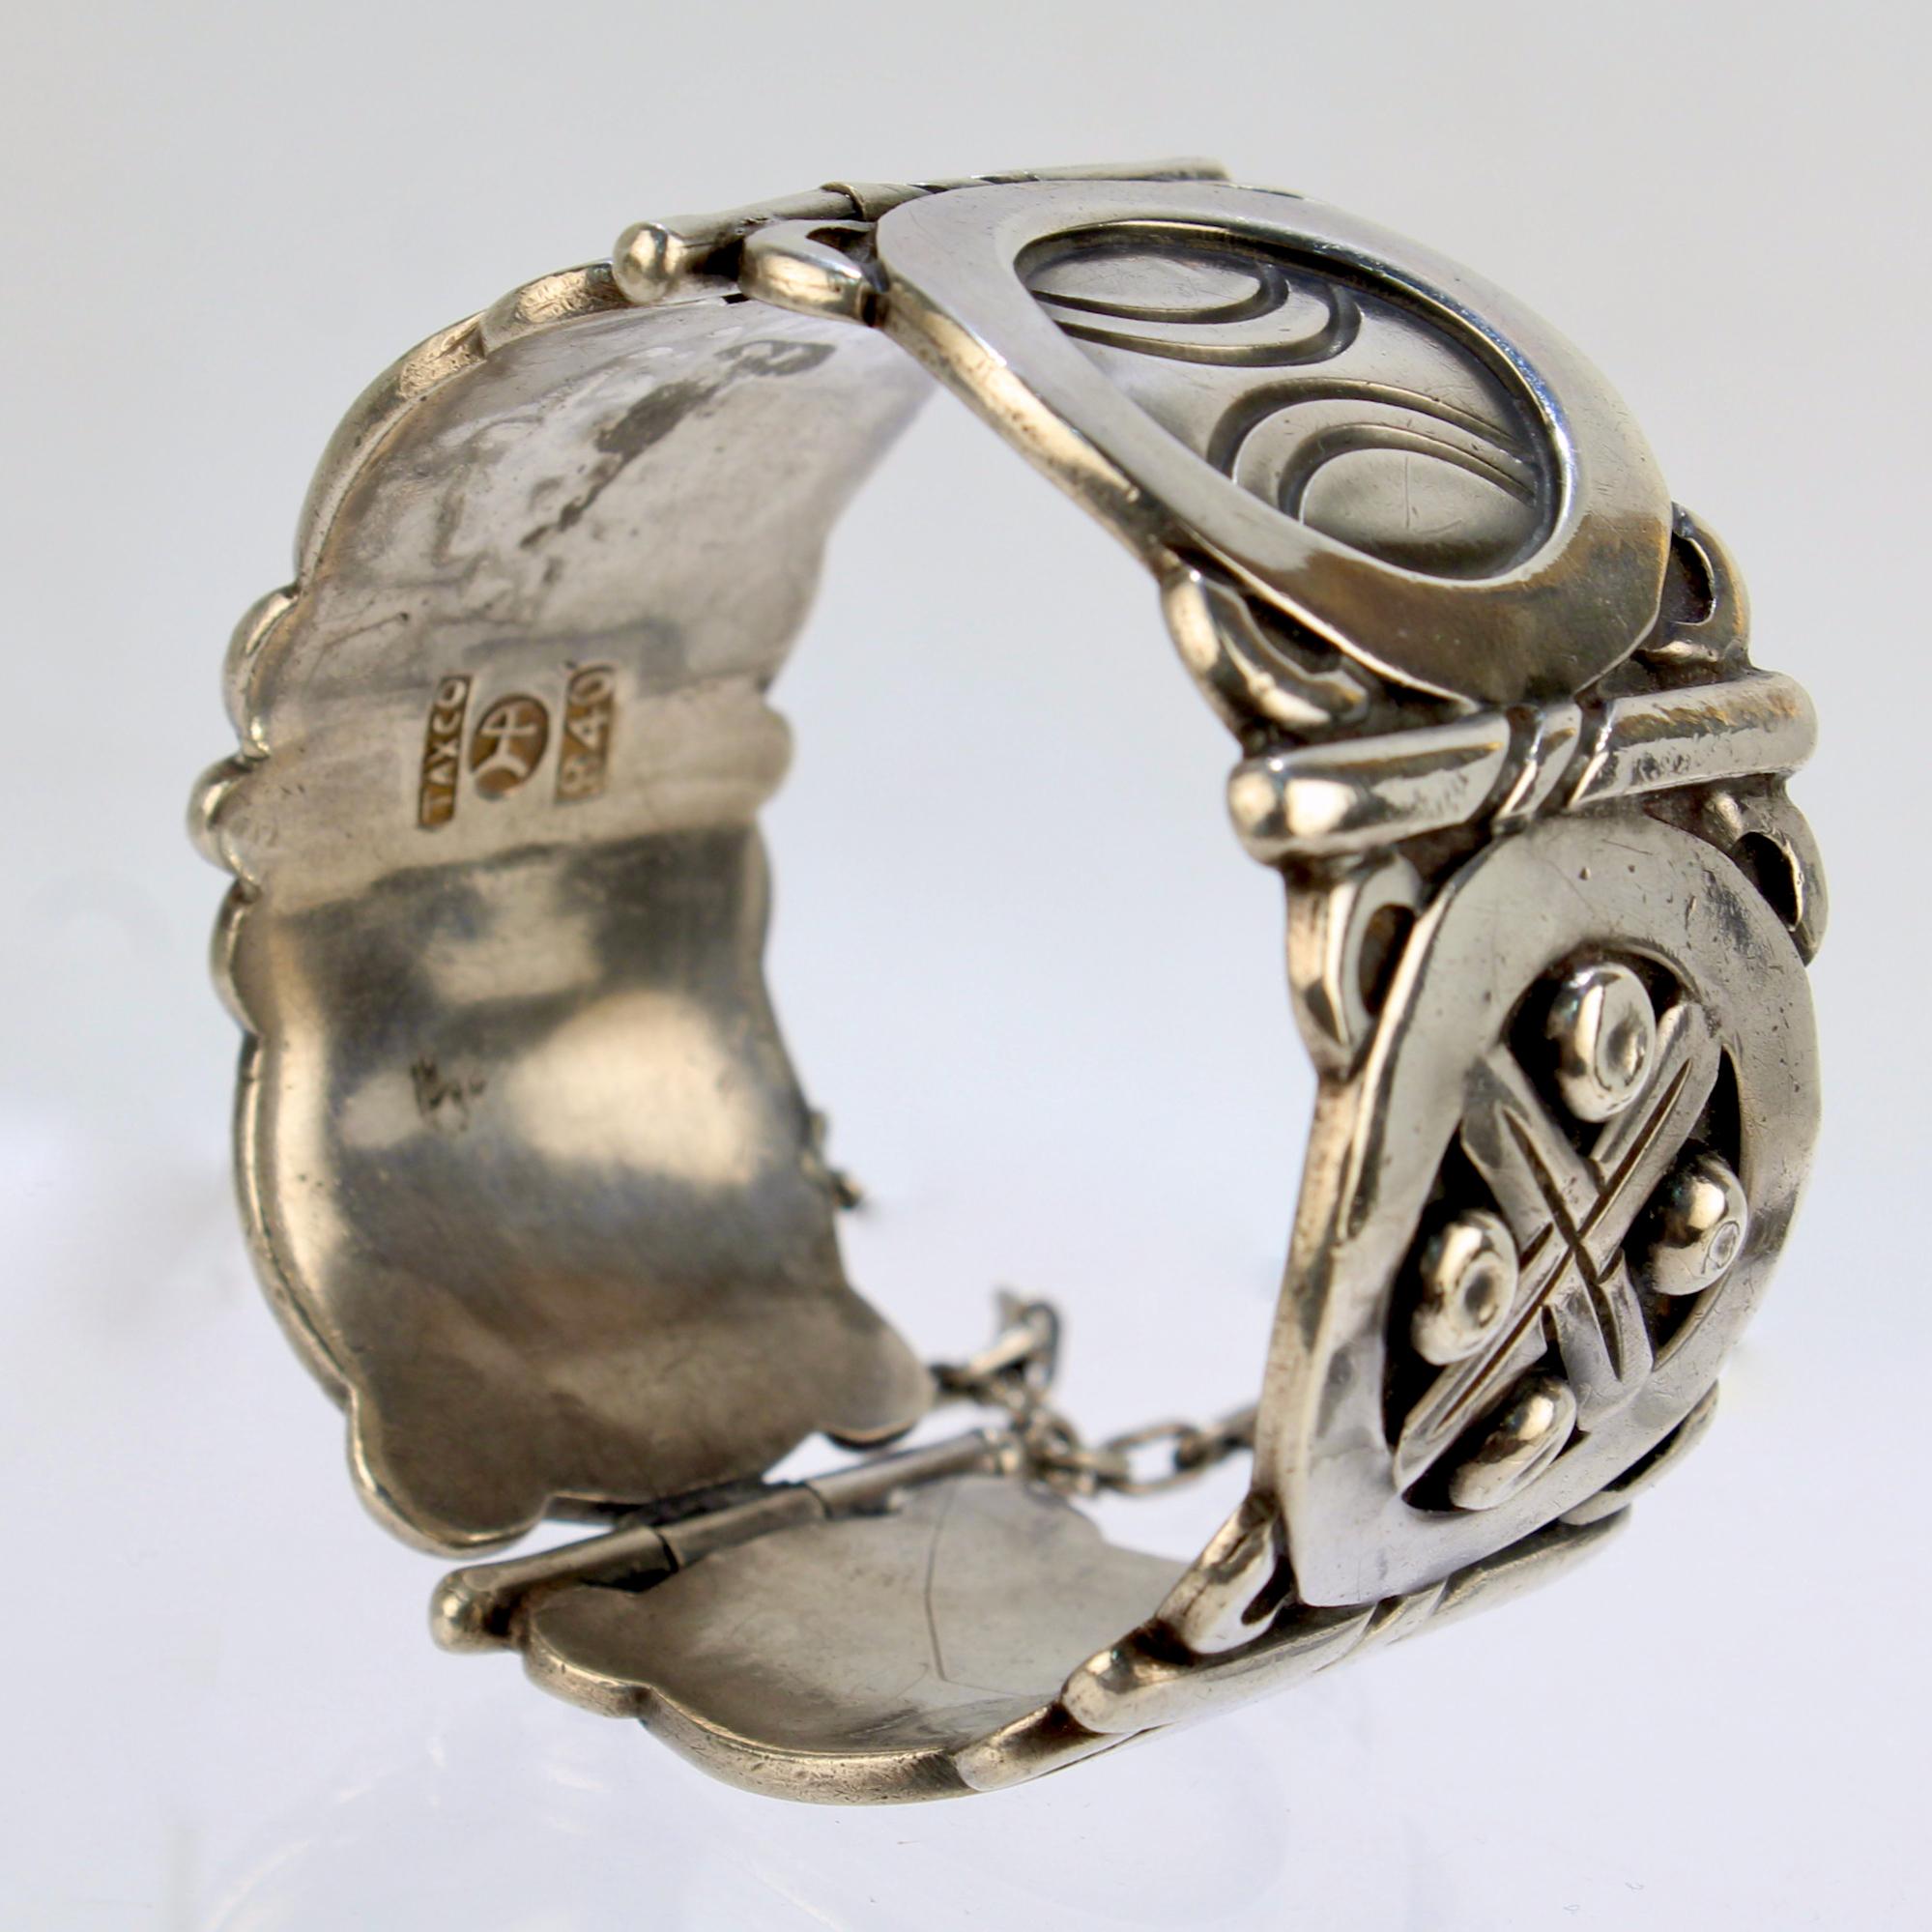 Retro Hector Aguilar Vintage Mexican Sterling Silver Cuff Bangle Bracelet